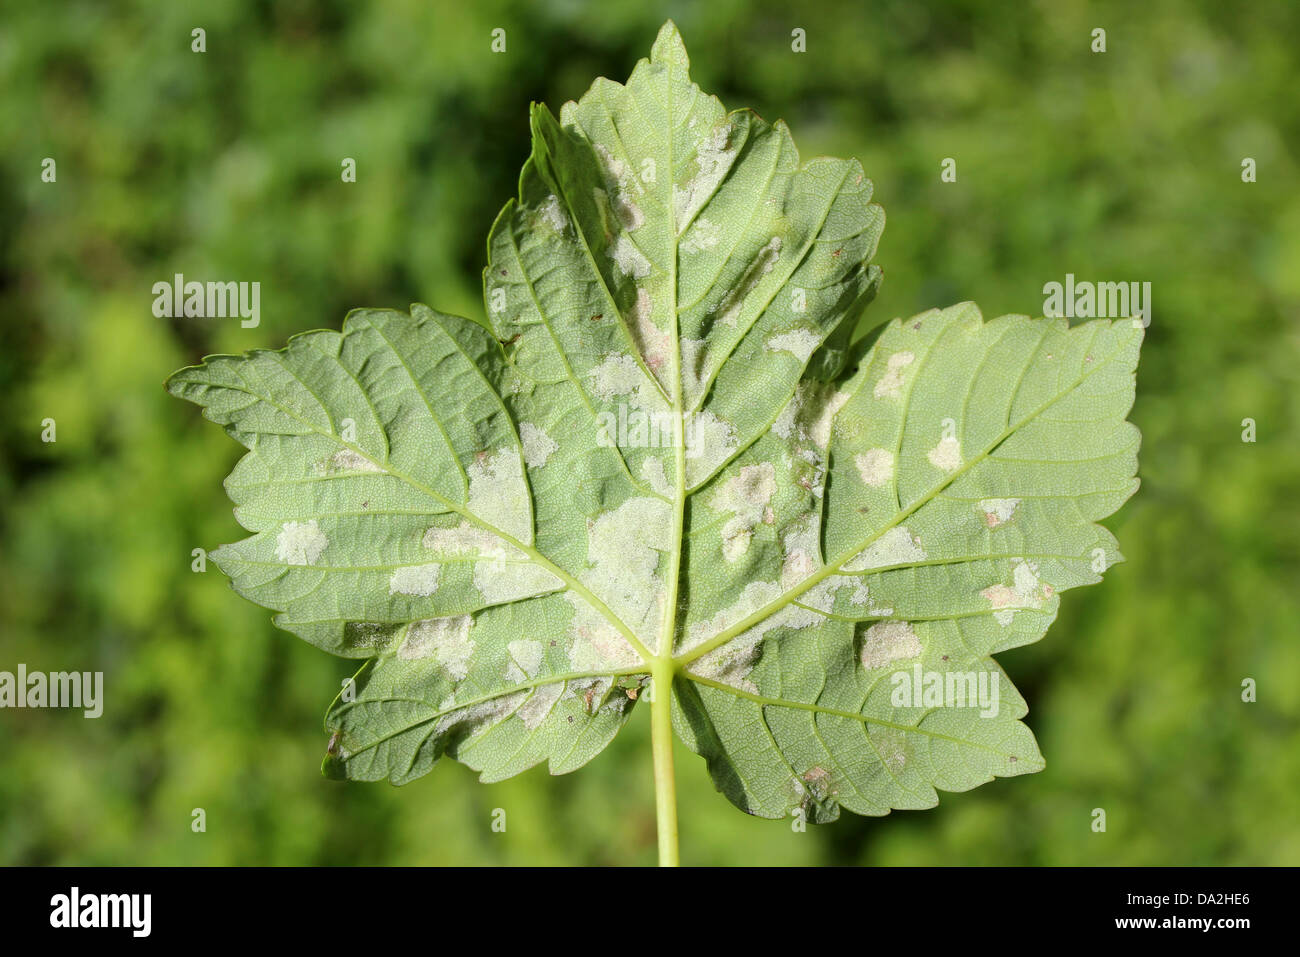 Sycamore leaves affected by Felt Galls caused by the Gall Mite Aceria pseudoplatani syn. Eriophyes pseudoplatani Stock Photo